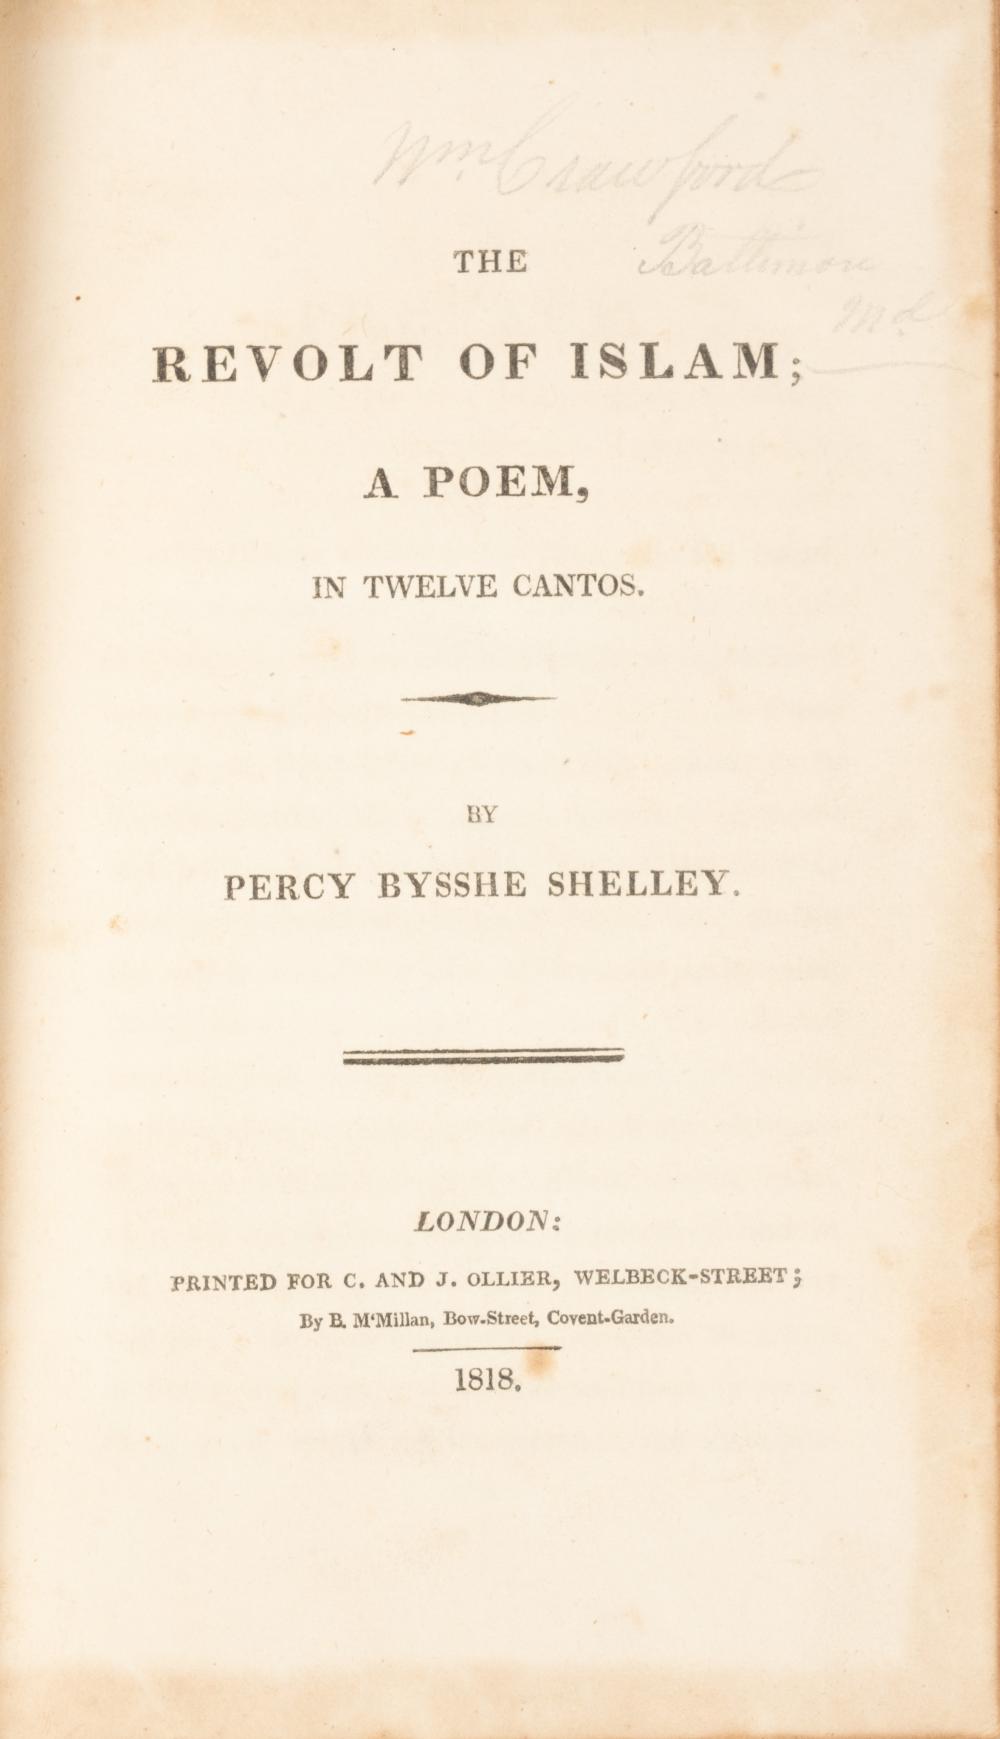 PERCY BYSSHE SHELLEY THE REVOLT 2ebfd6